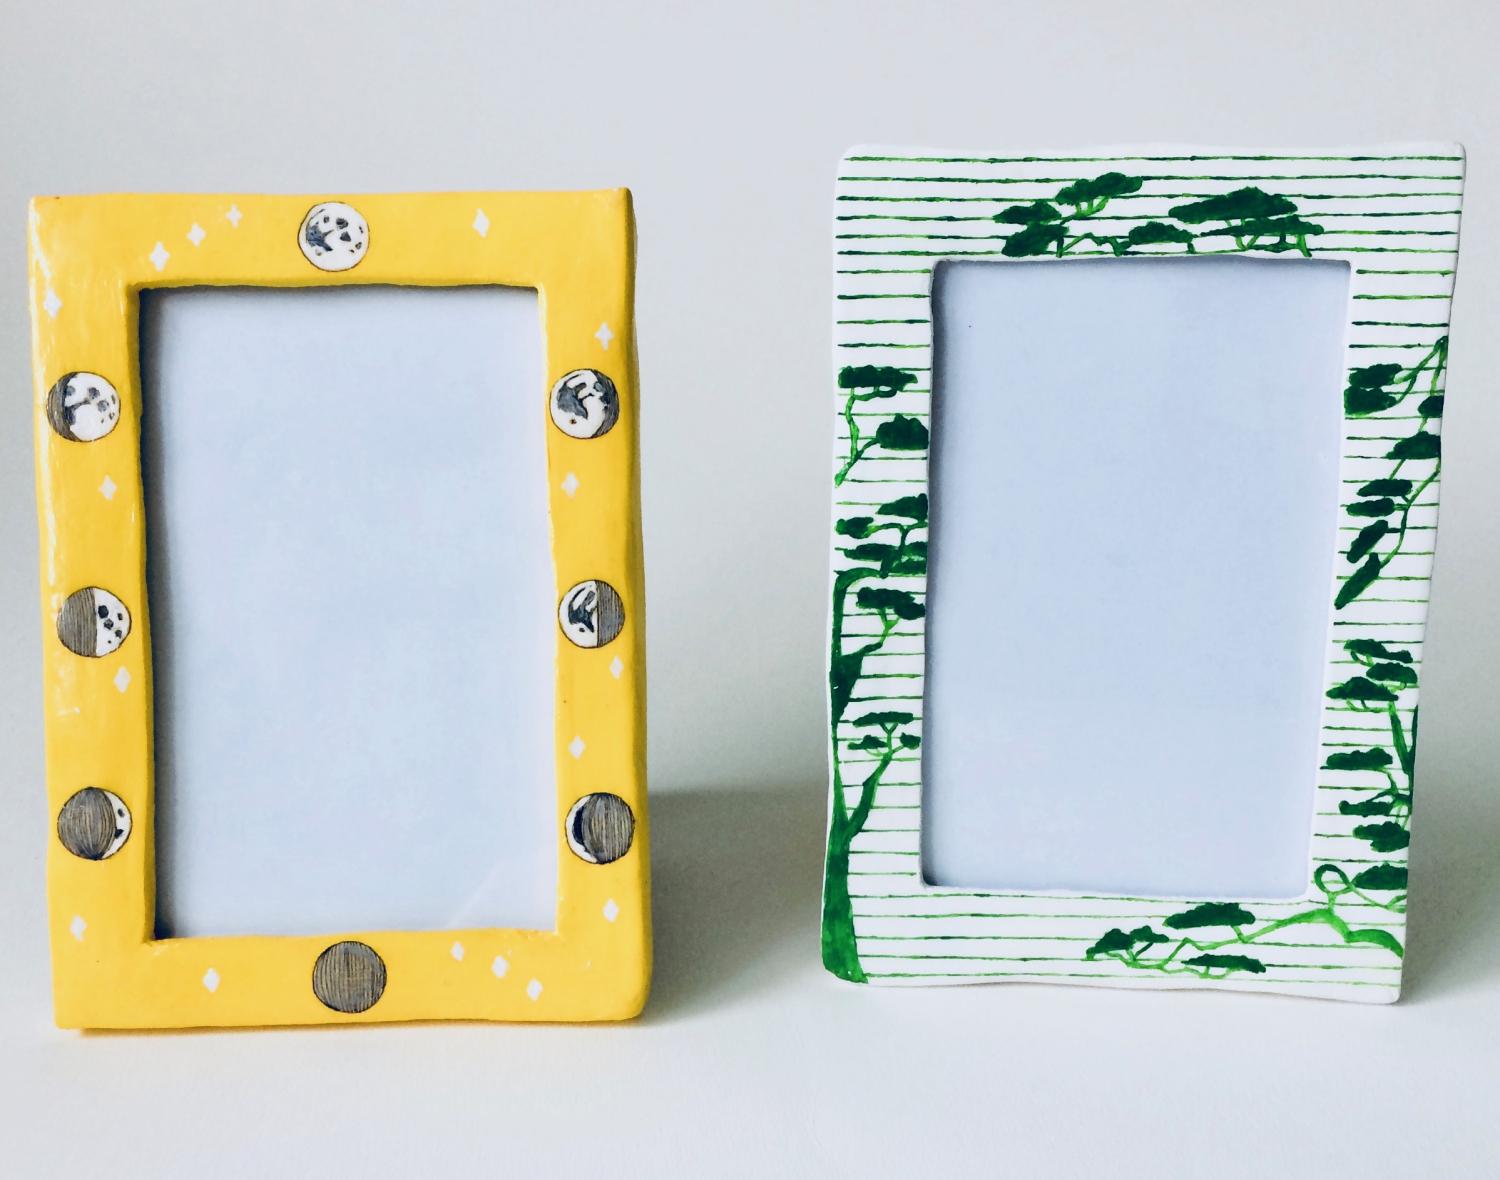 Final result showing two picture frames